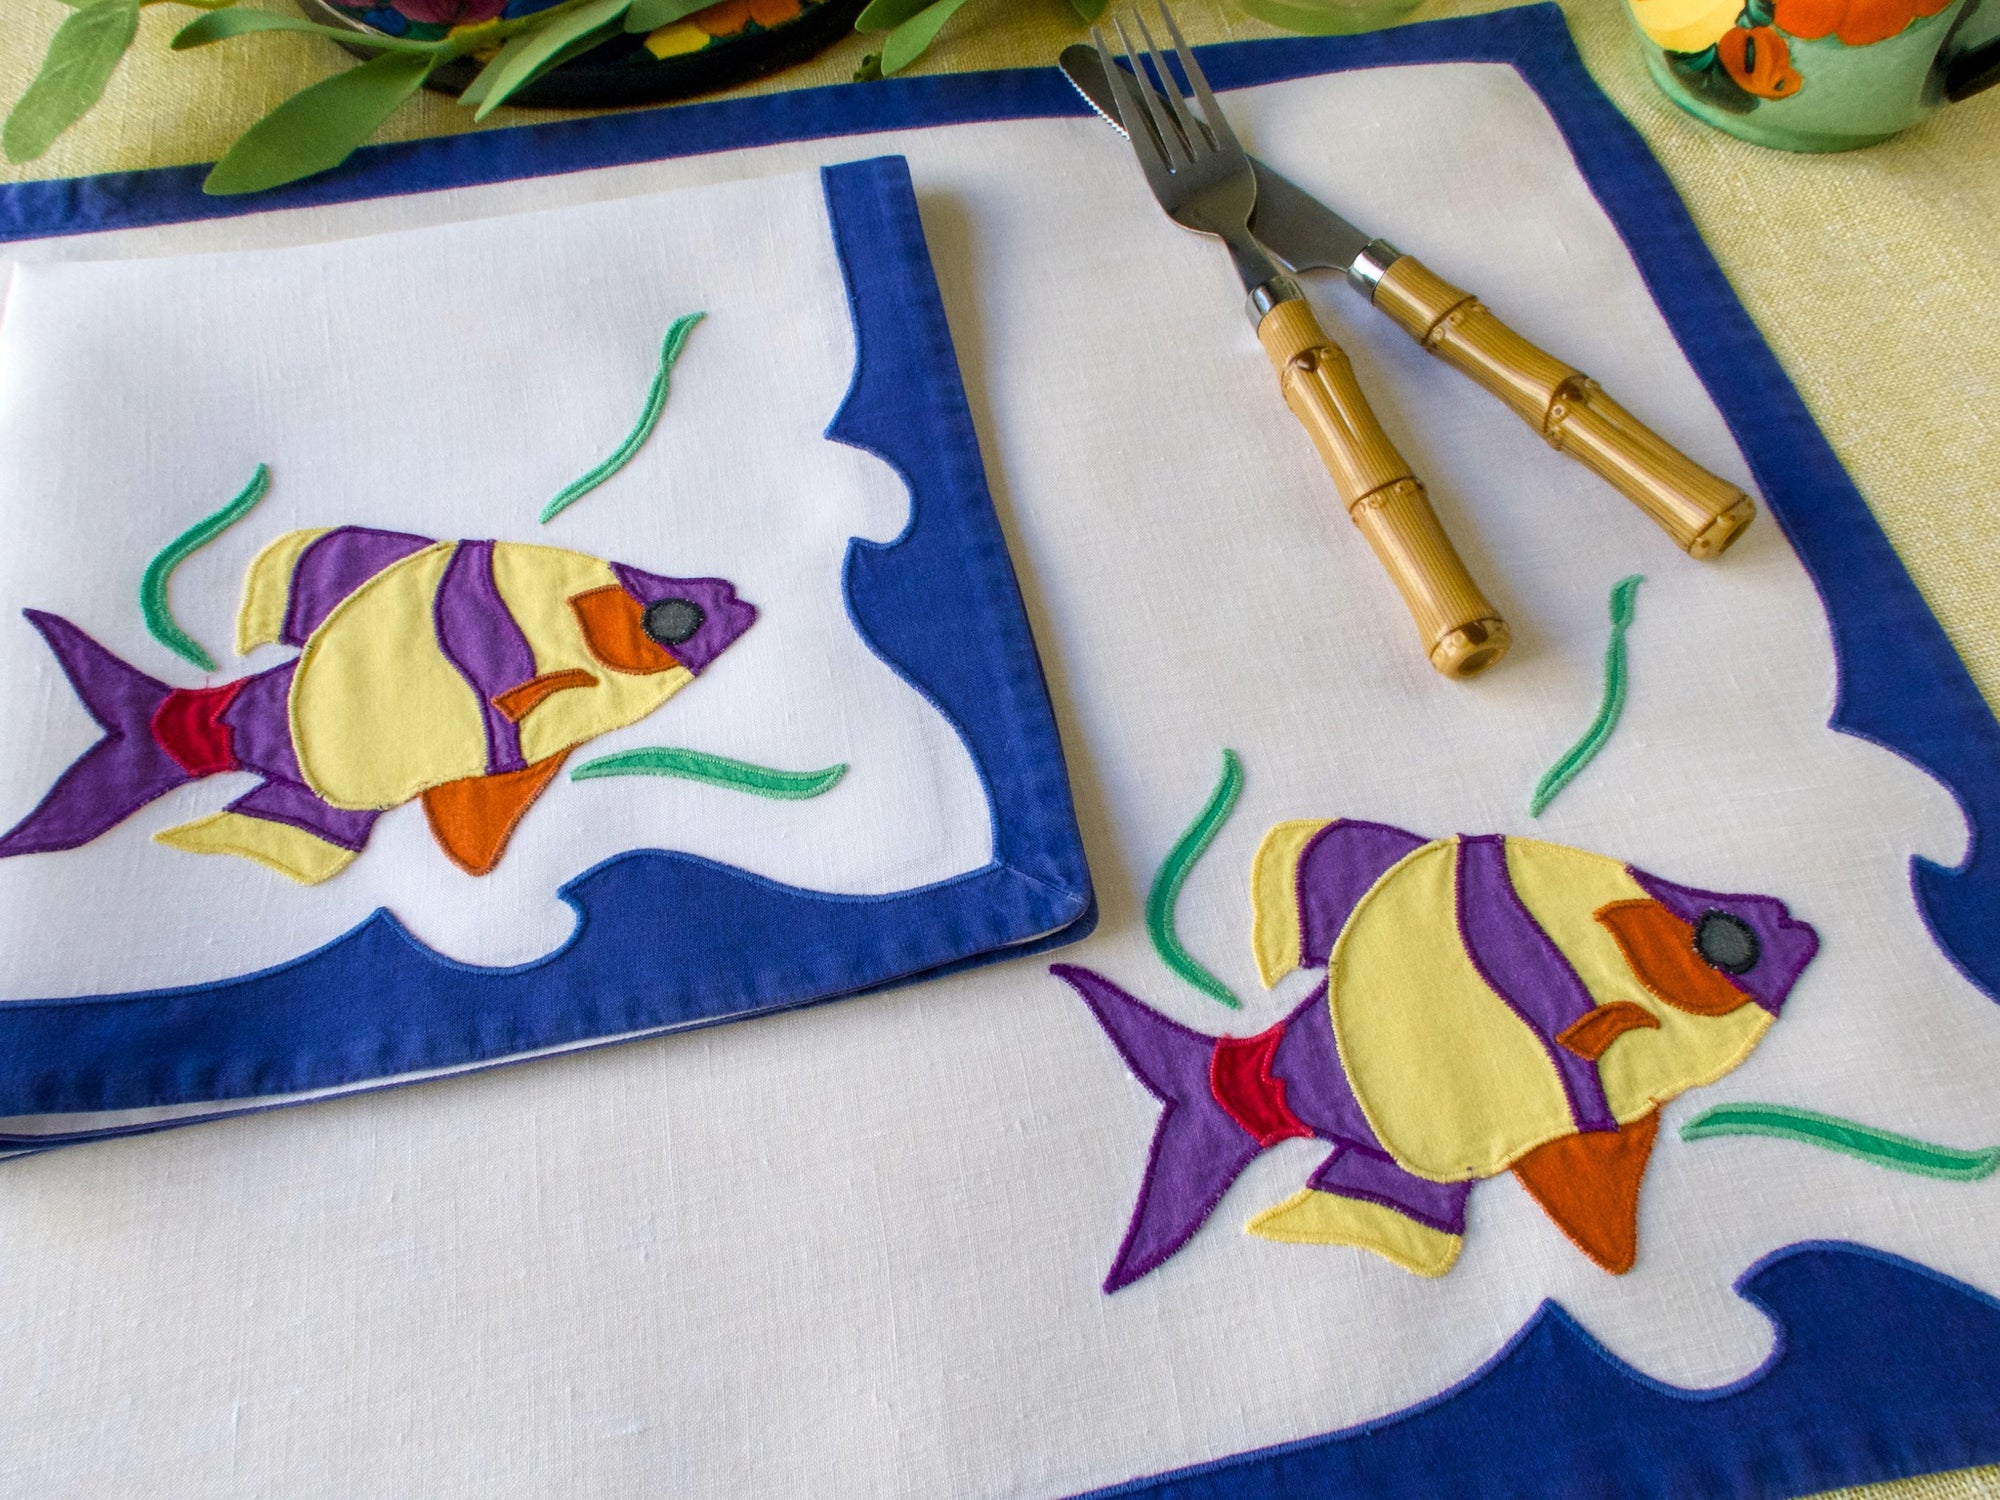 Brightly colored fish embroidered on a placemat set